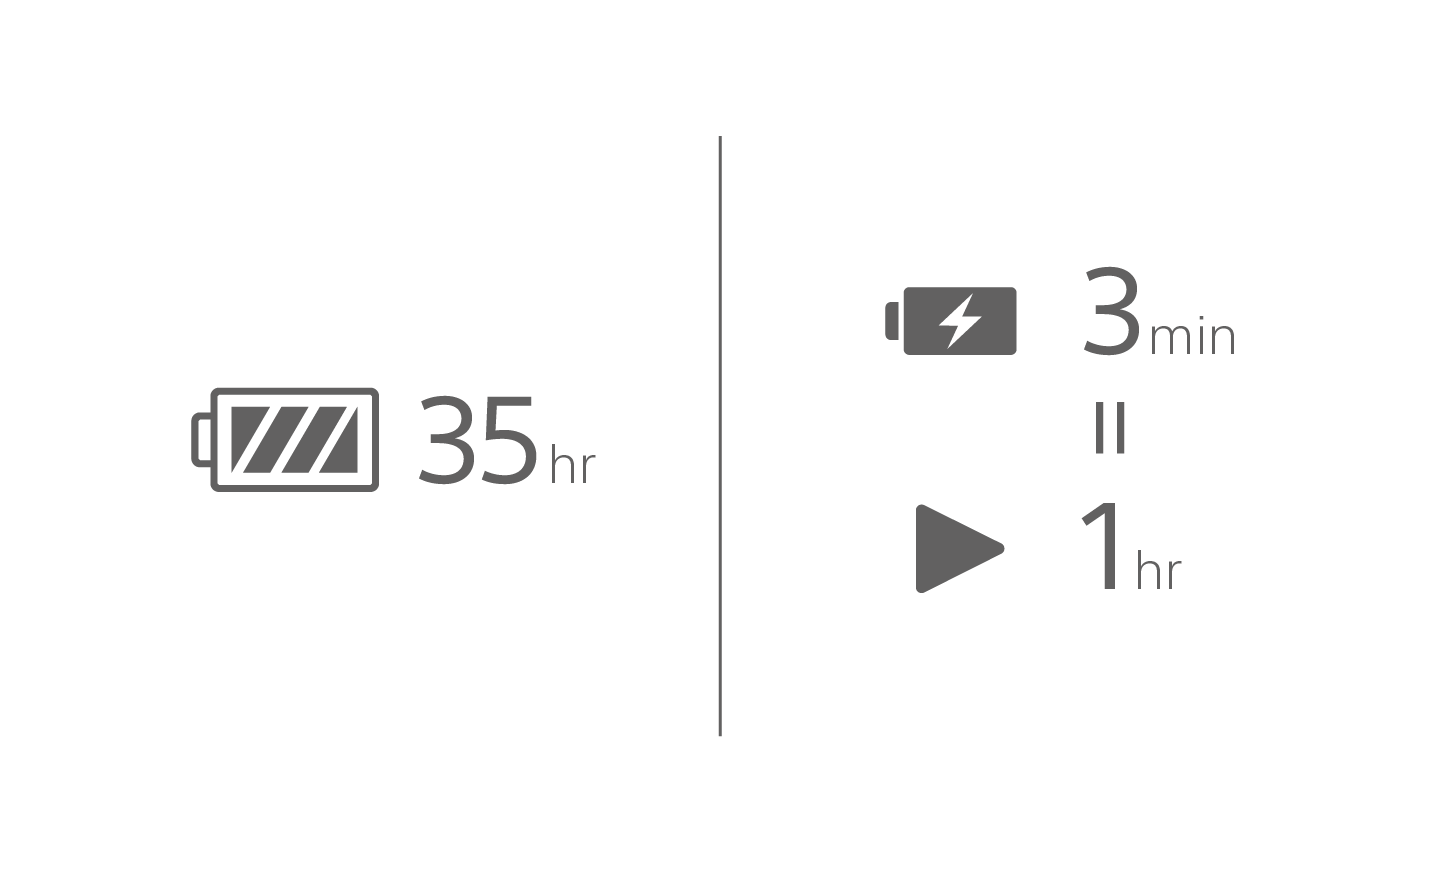 Image of a battery icon with 35 hr text, a charging battery icon with 3 min text above a play icon with 1 hr text